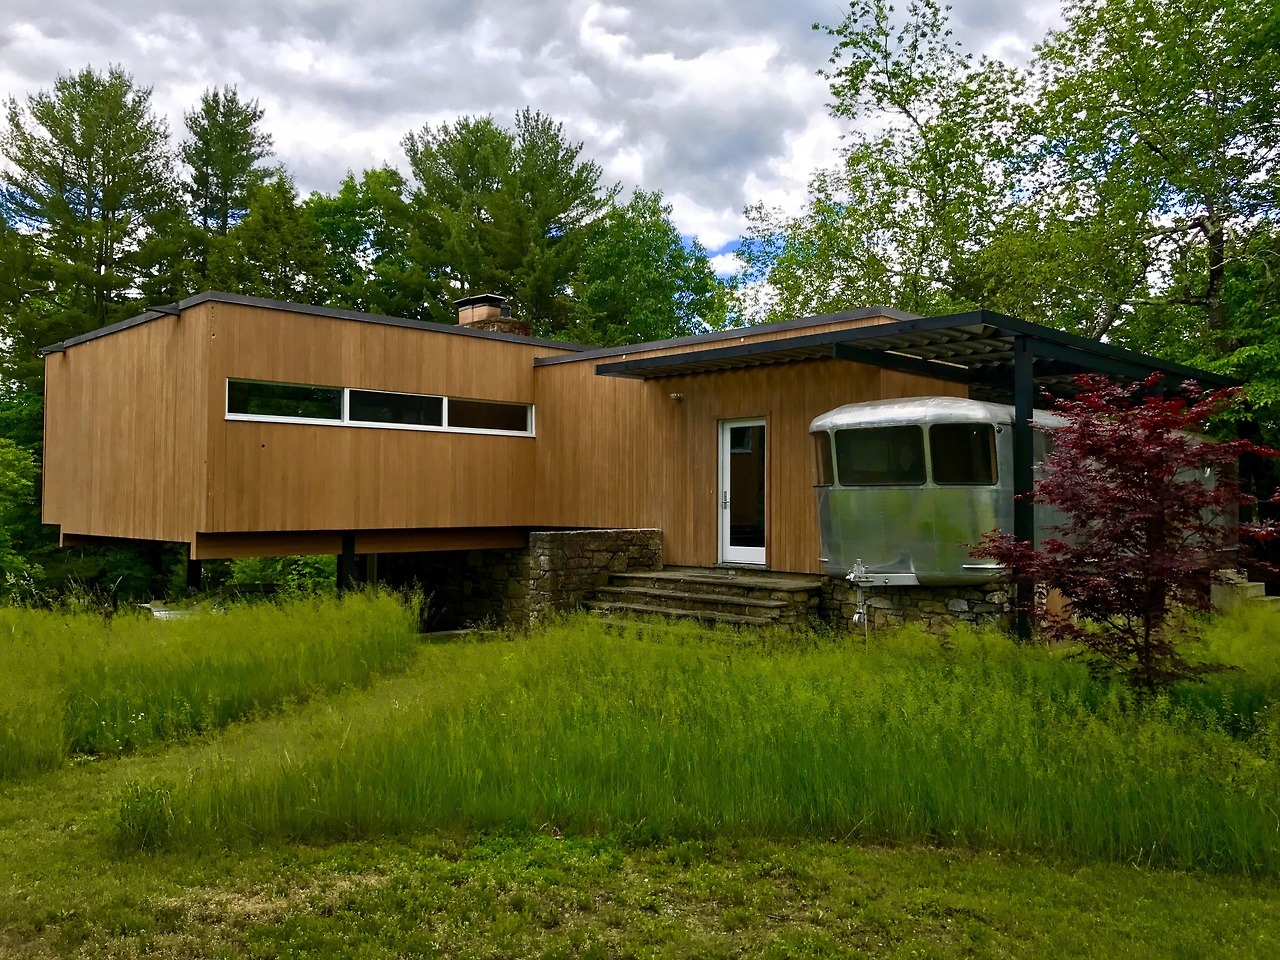 Dutchess County, New York
Cypress-clad cabin built by Bauhaus architect Marcel Breuer in 1949 for his friend, artist Sidney Wolfson. Constructed to incorporate Wolfson’s Spartan Mansion trailer as the kitchen wing.
Submitted by Matt Mitchell
More...